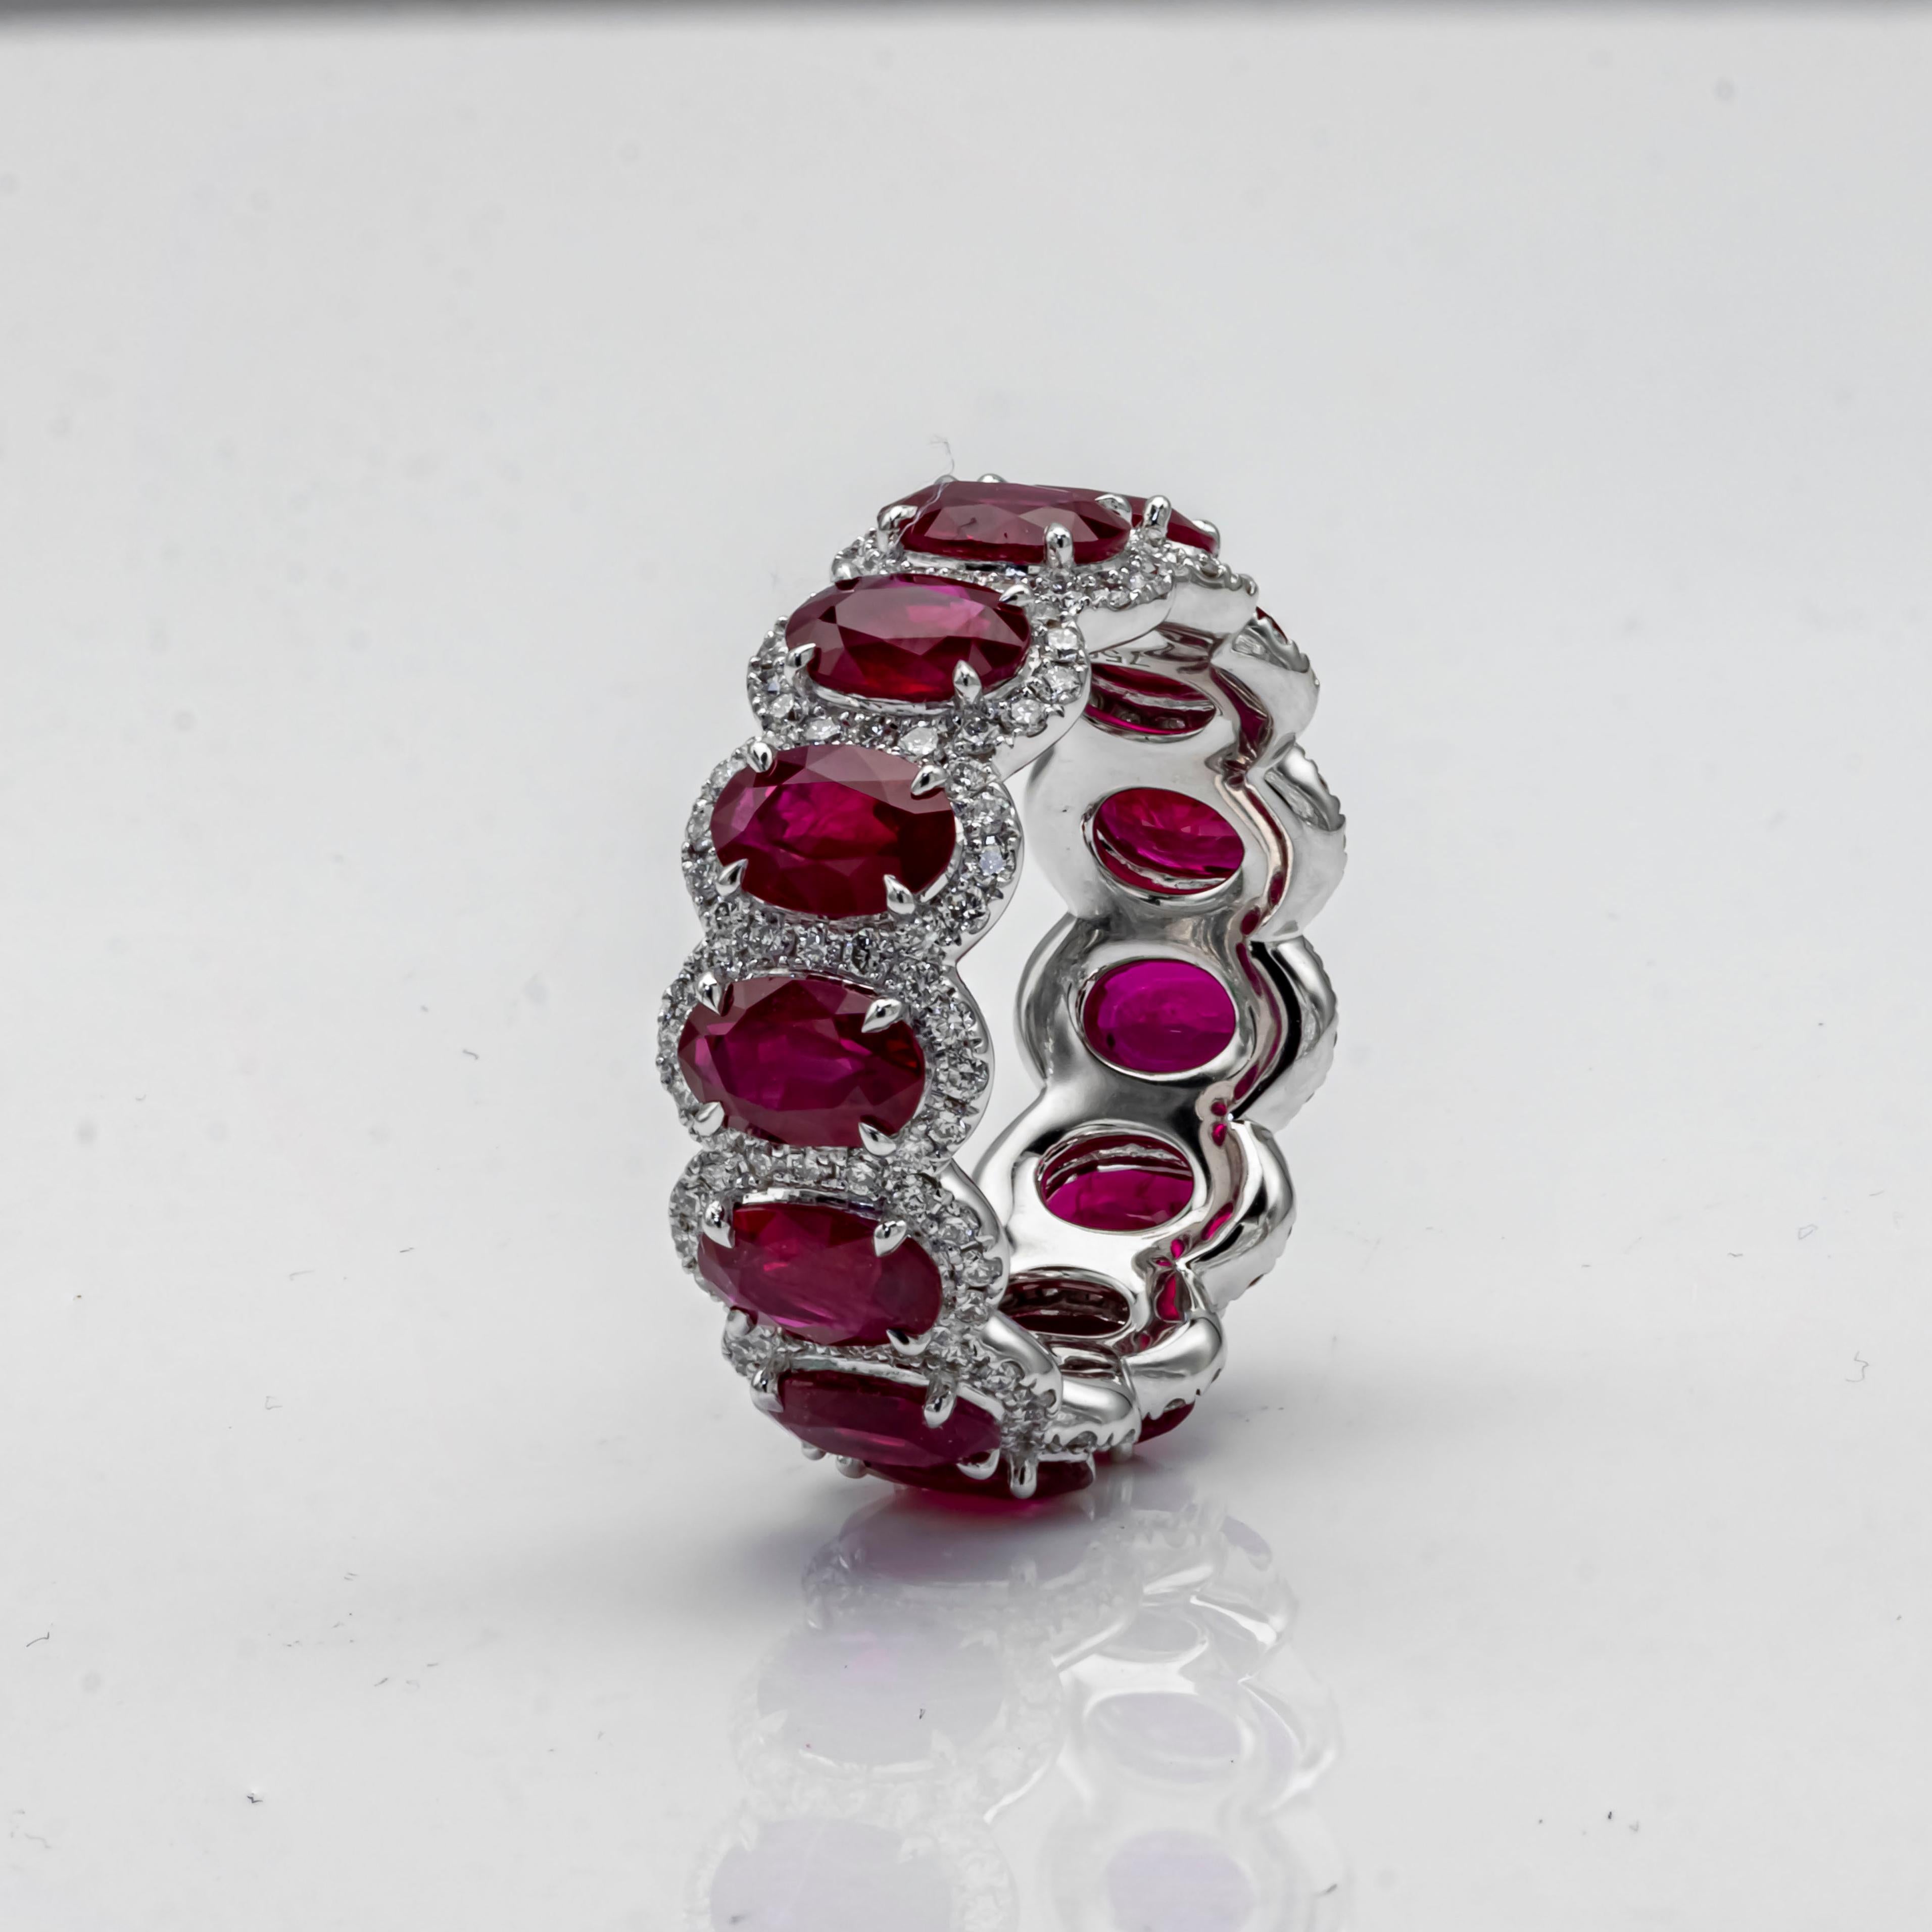 Elegantly crafted eternity wedding band ring showcasing thirteen oval cut red rubies weighing 6.38 carats total. Surrounded by 169 pieces row of round brilliant diamonds in halo setting. Diamonds weighs 0.85 carat total, G color and VS in clarity.